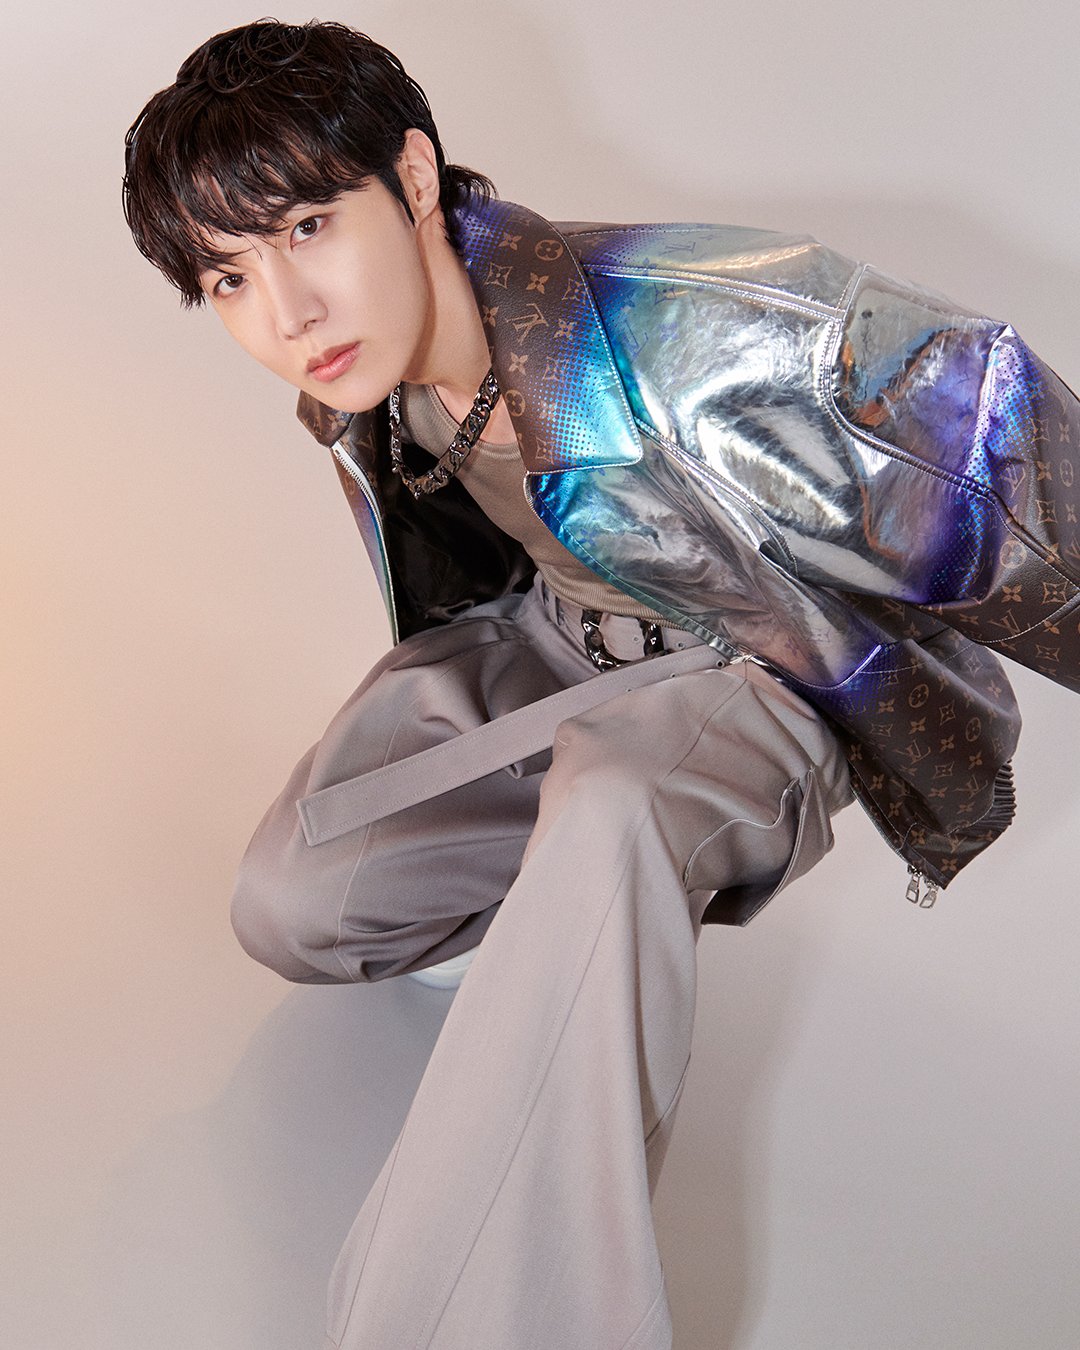 Louis Vuitton on X: #jhope for #LVMenFW23. The star will attend the  upcoming #LouisVuitton Men's Fashion Show. Watch live today at 2:30 pm  (CET) on Twitter or   / X